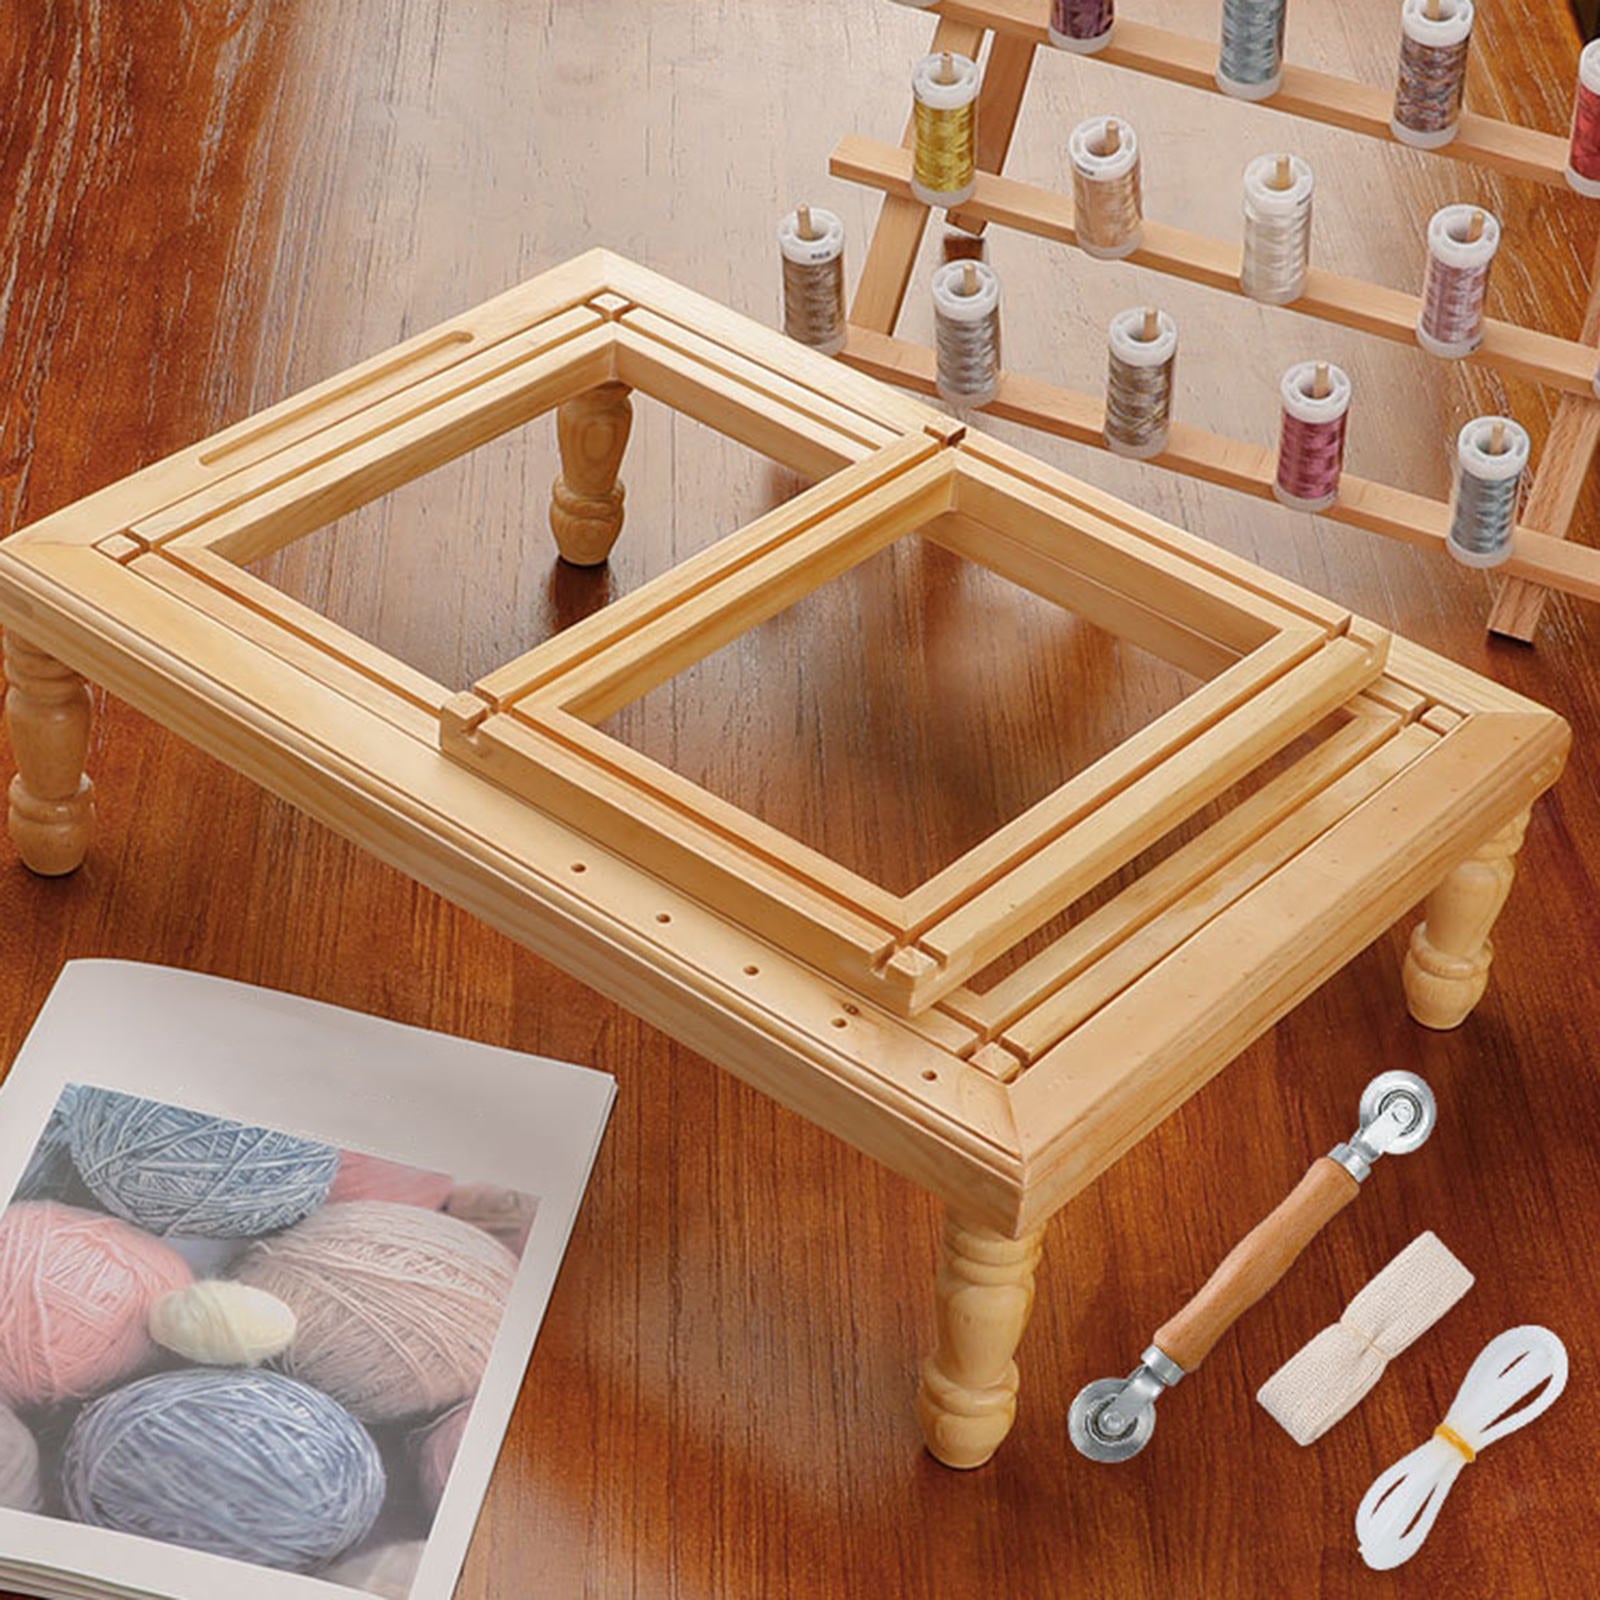 Cross-Stitch Rack Tabletop Embroidery Lap Stand Wood Frame DIY Sewing Tools